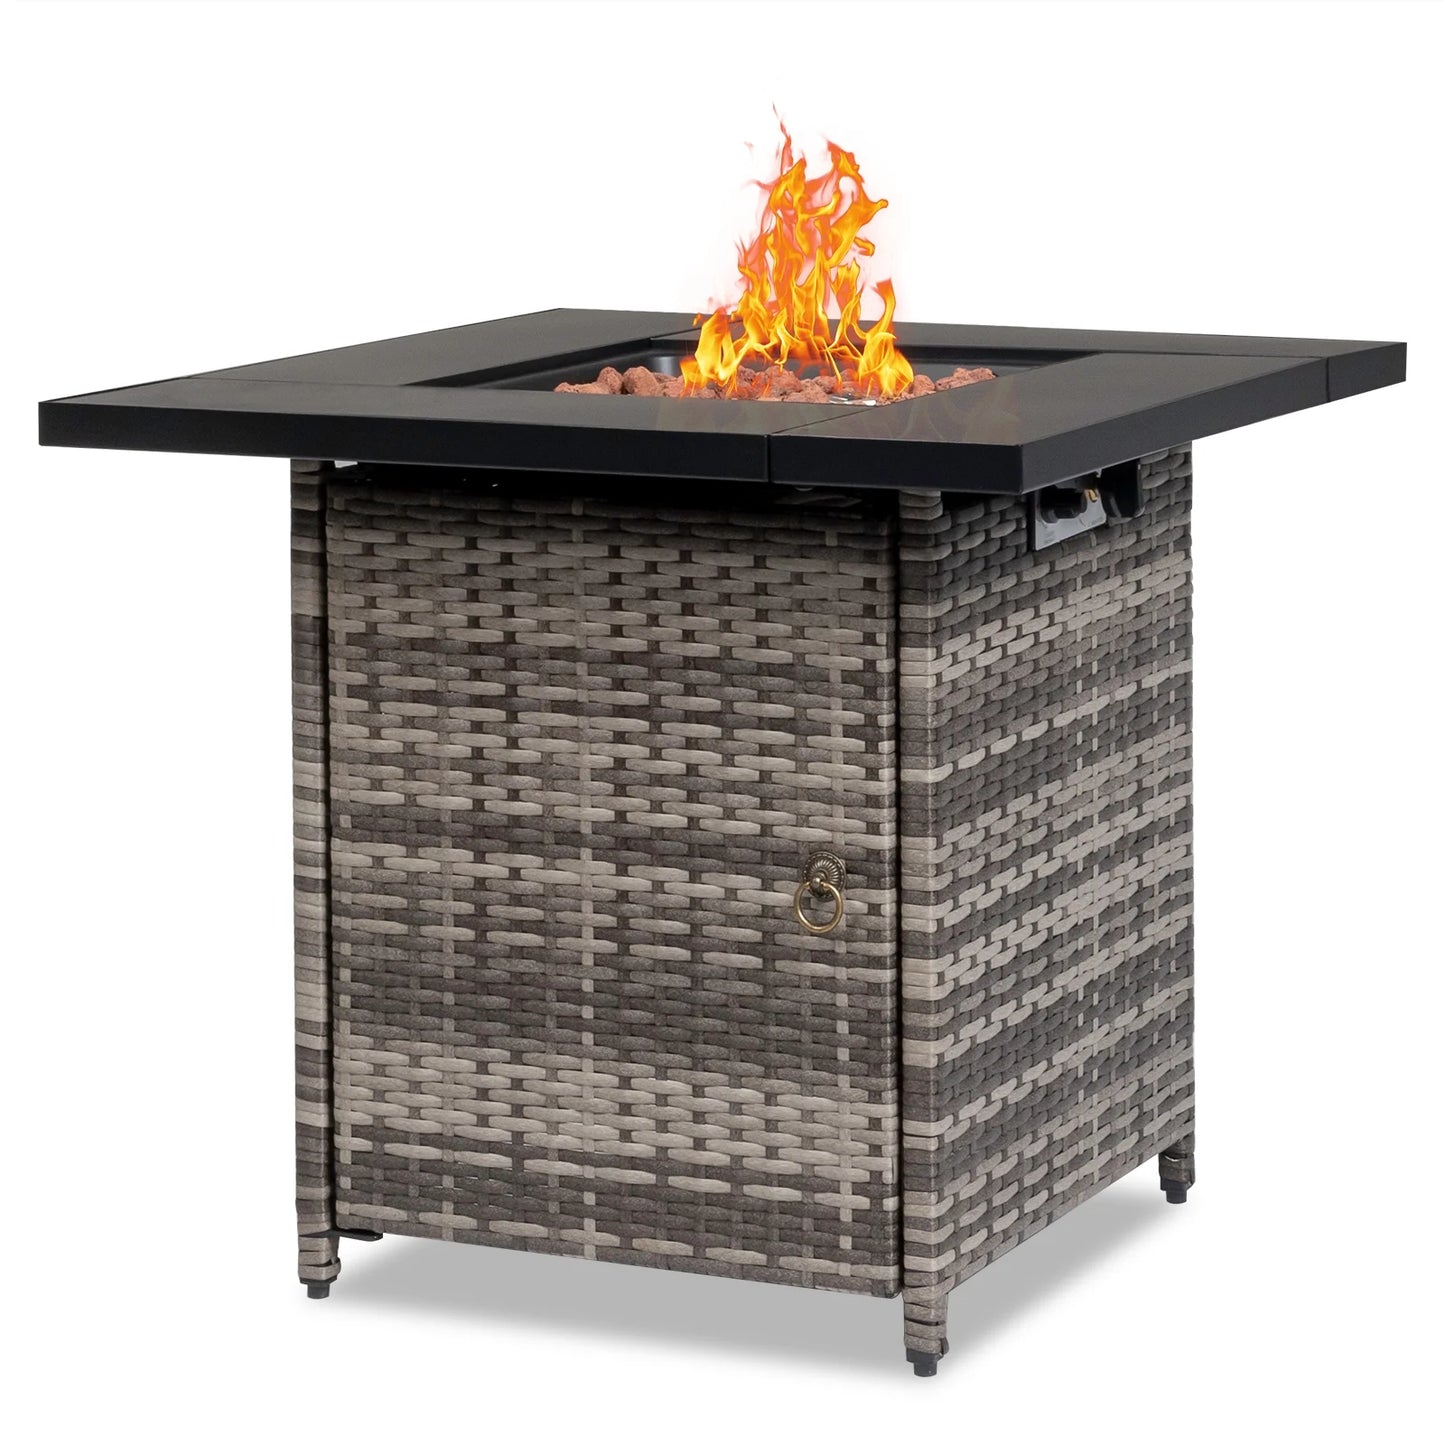 Propane Fire Pit Table, Outdoor Gas Fire Pit Table with Lid and Lava Rock, 28" 40,000 BTU Auto-Ignition Fire Pit, CSA Certification and Strong Steel Frame, Fit for Patio Garden Backyard Deck